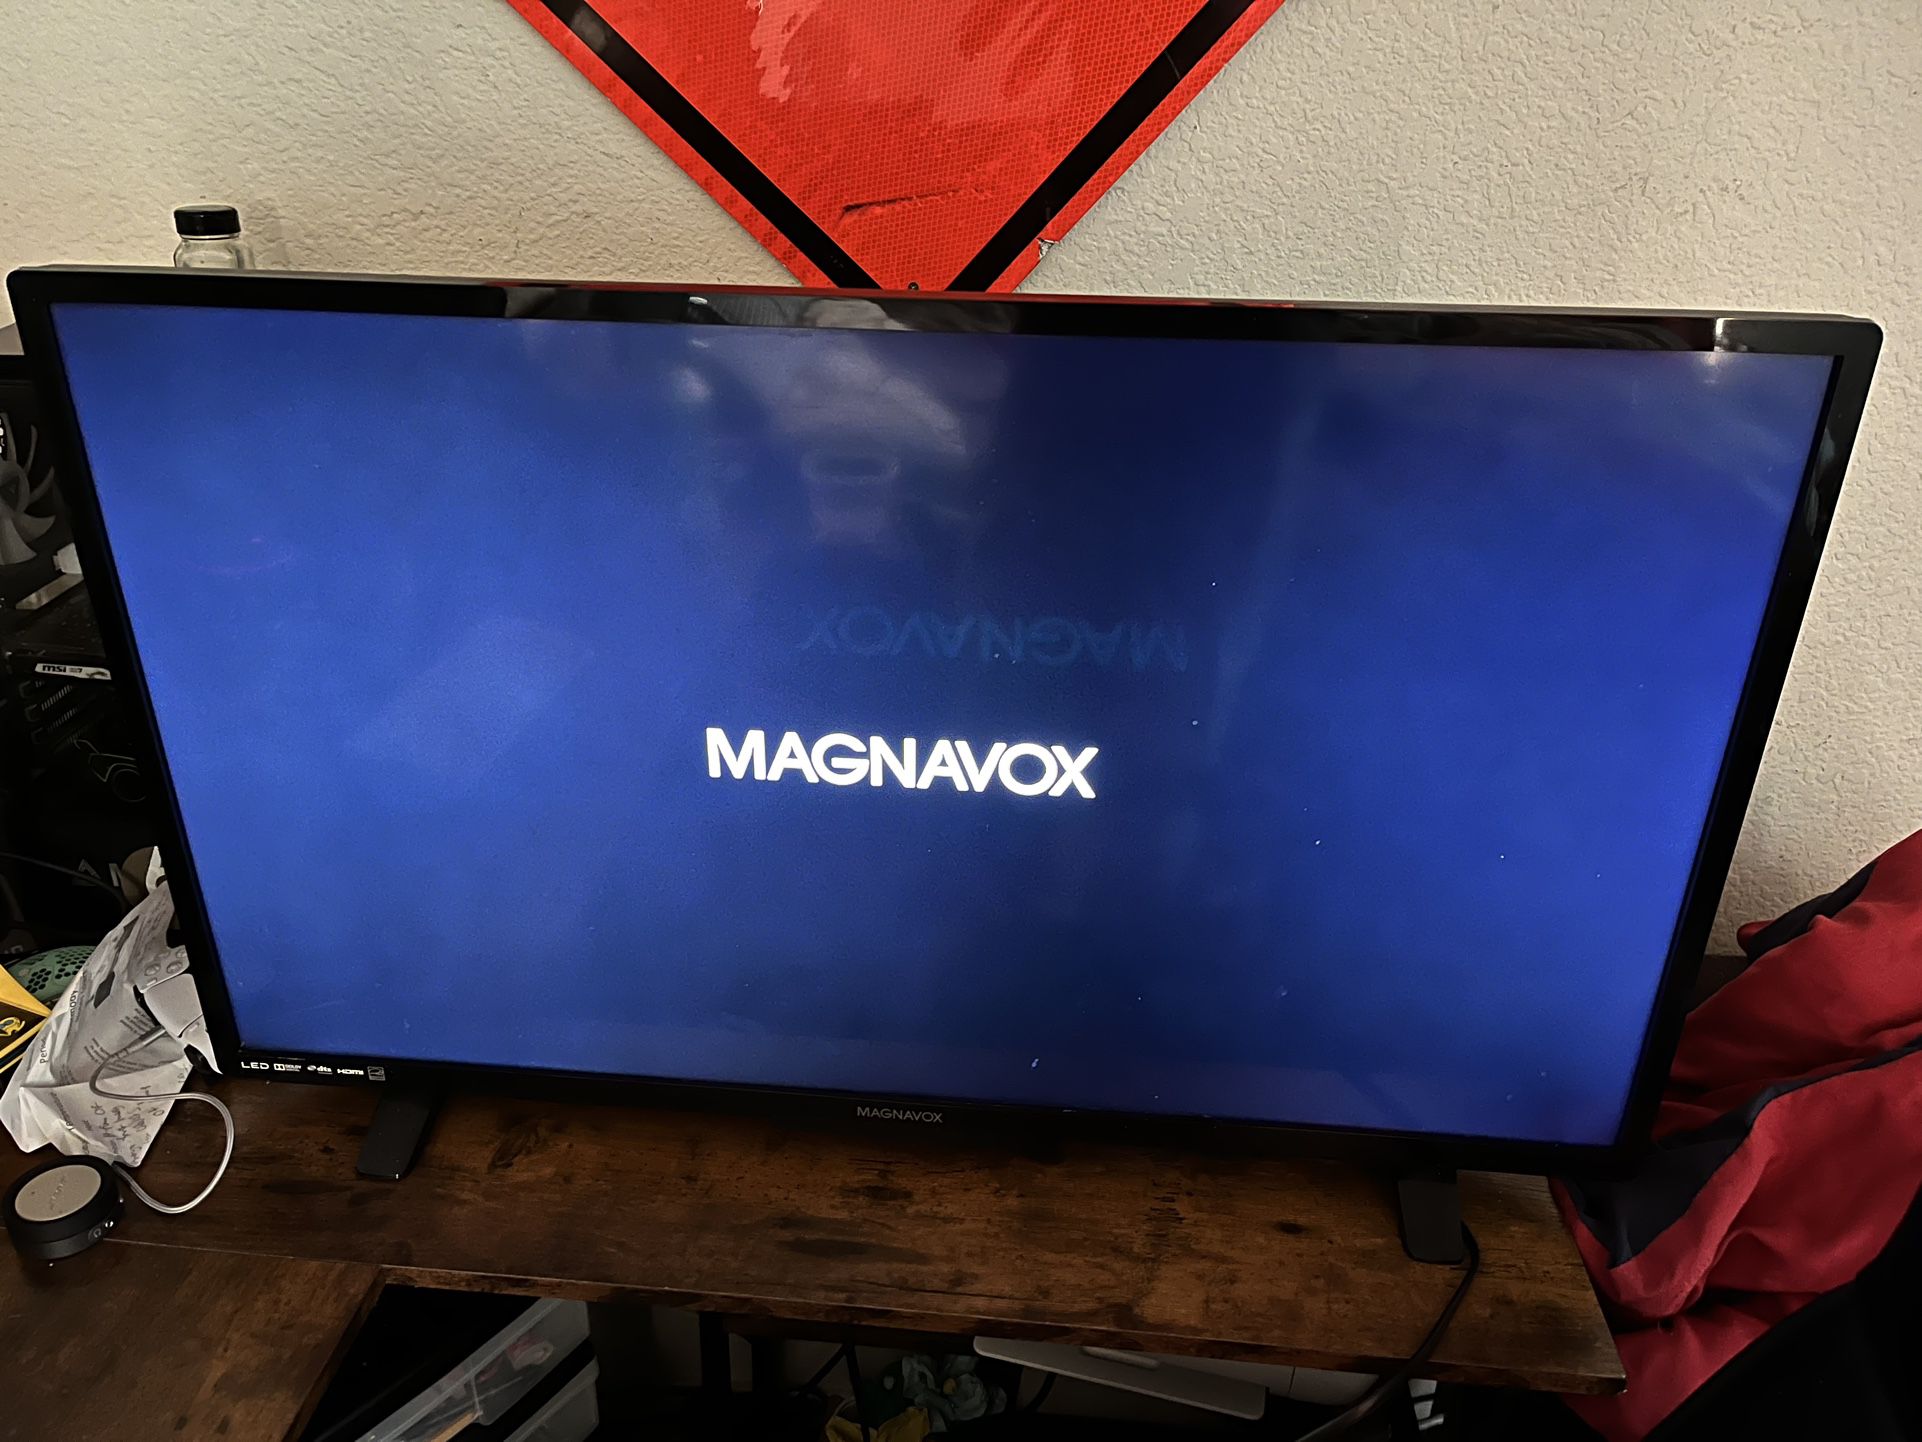 Magnavox 40 Inch Tv For $40 Firm 